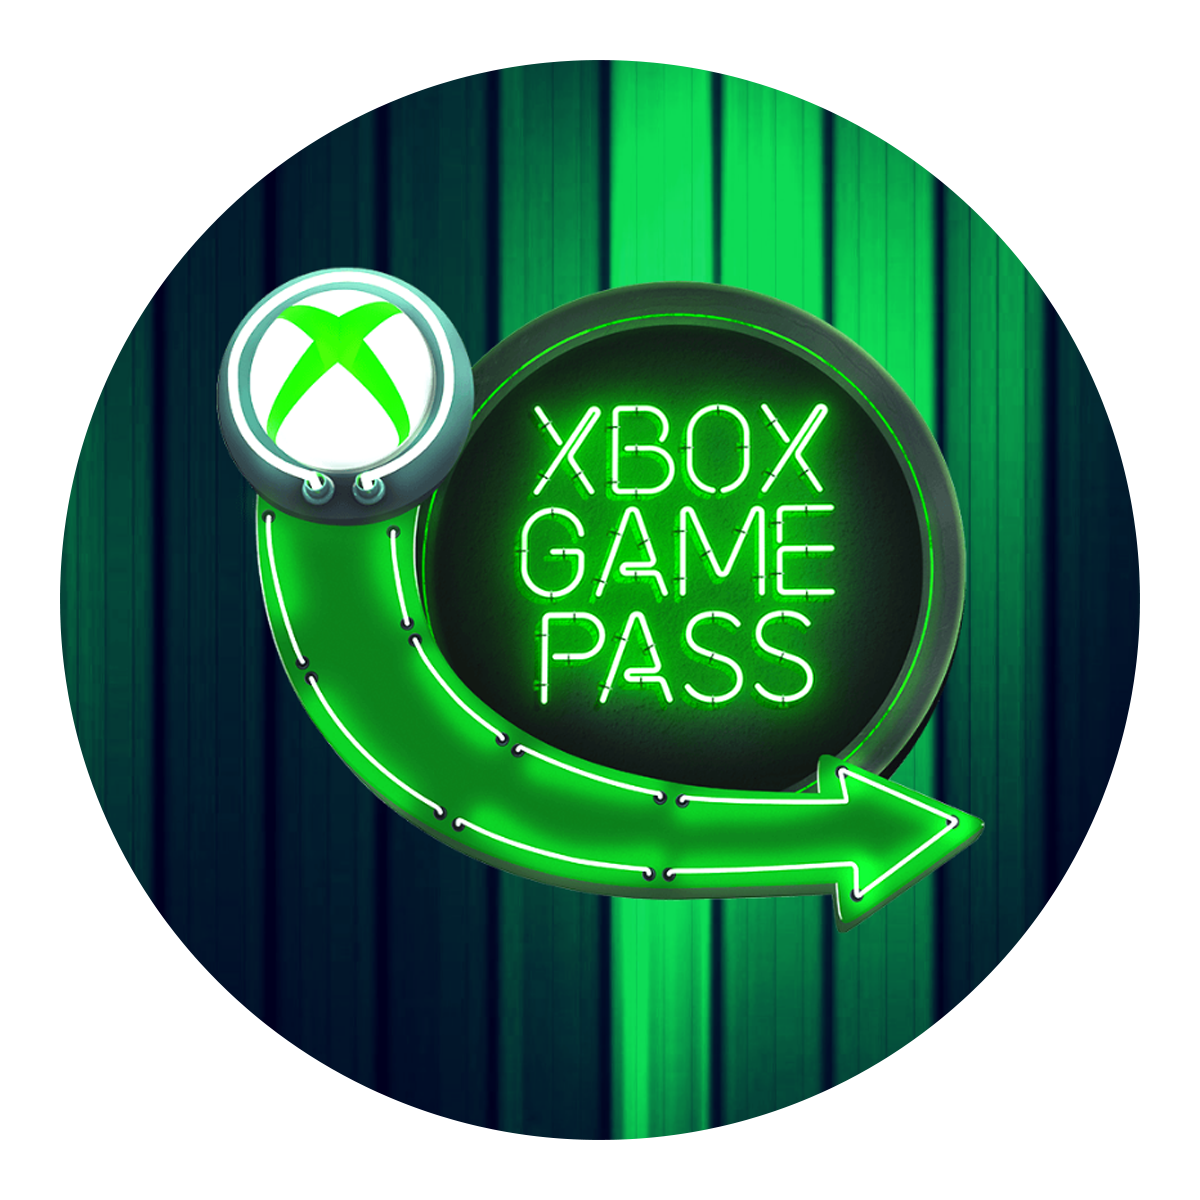 20 Bethesda Games from the World's Most Iconic Franchises Available in Xbox Game  Pass Tomorrow - Xbox Wire